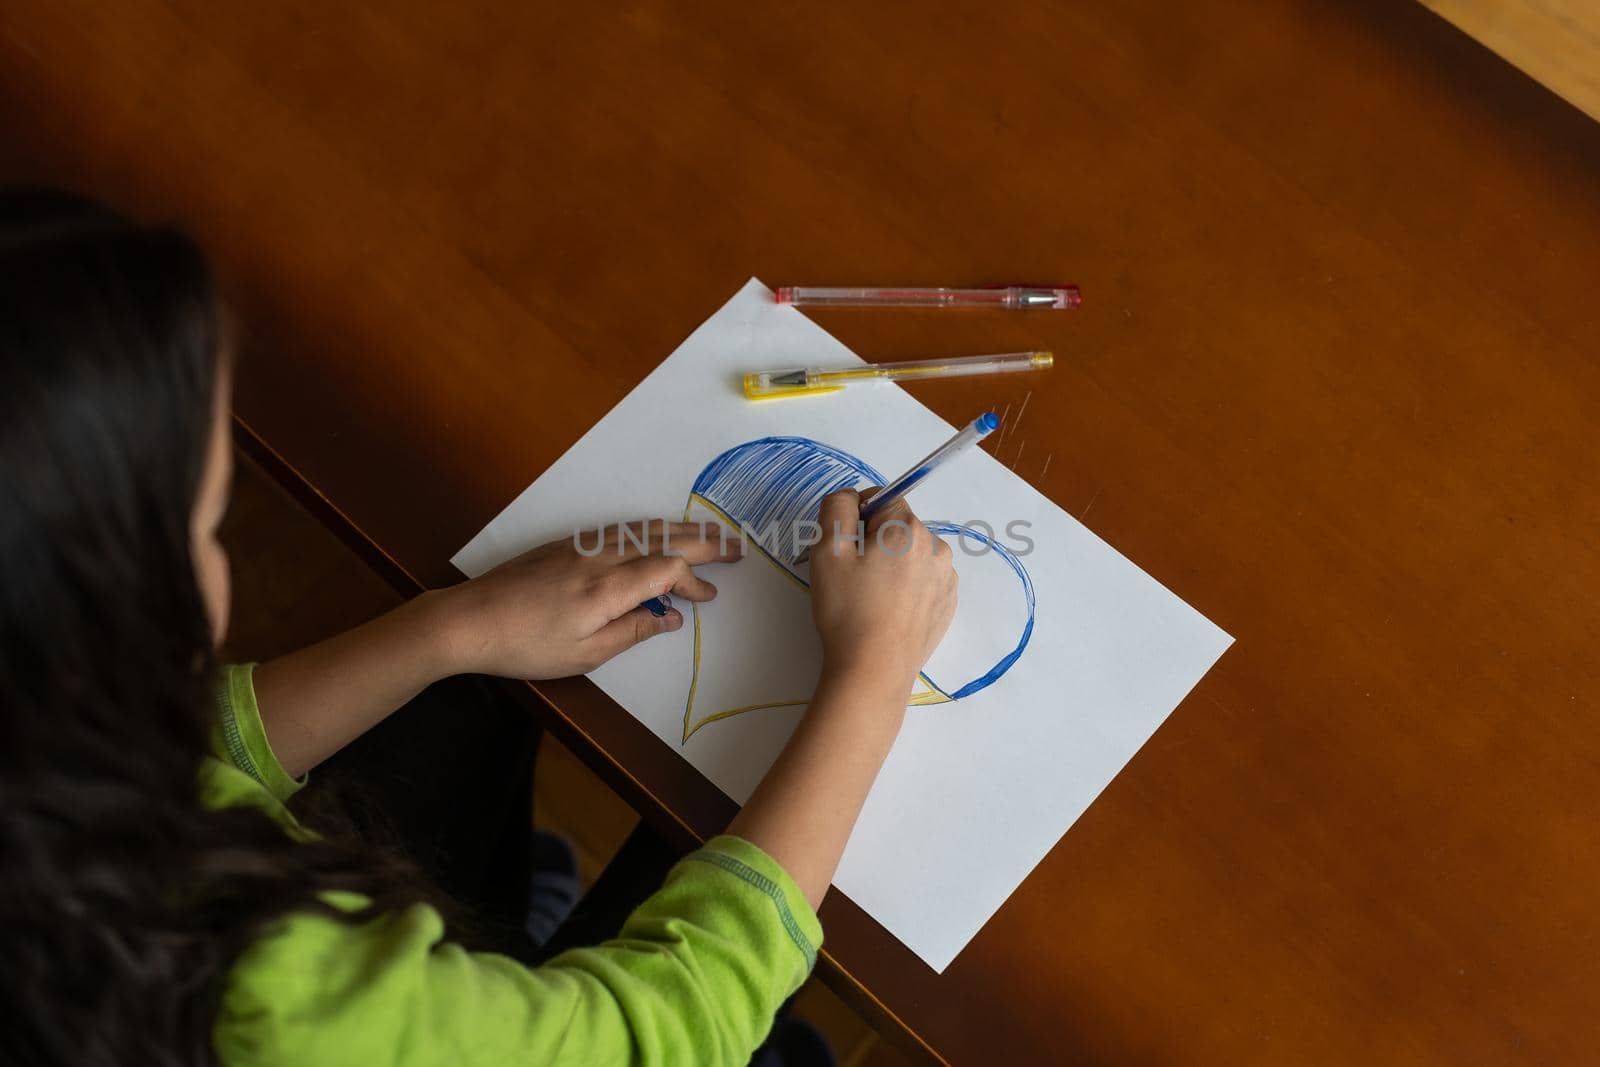 Childrens hand with pencil draws the heartl.